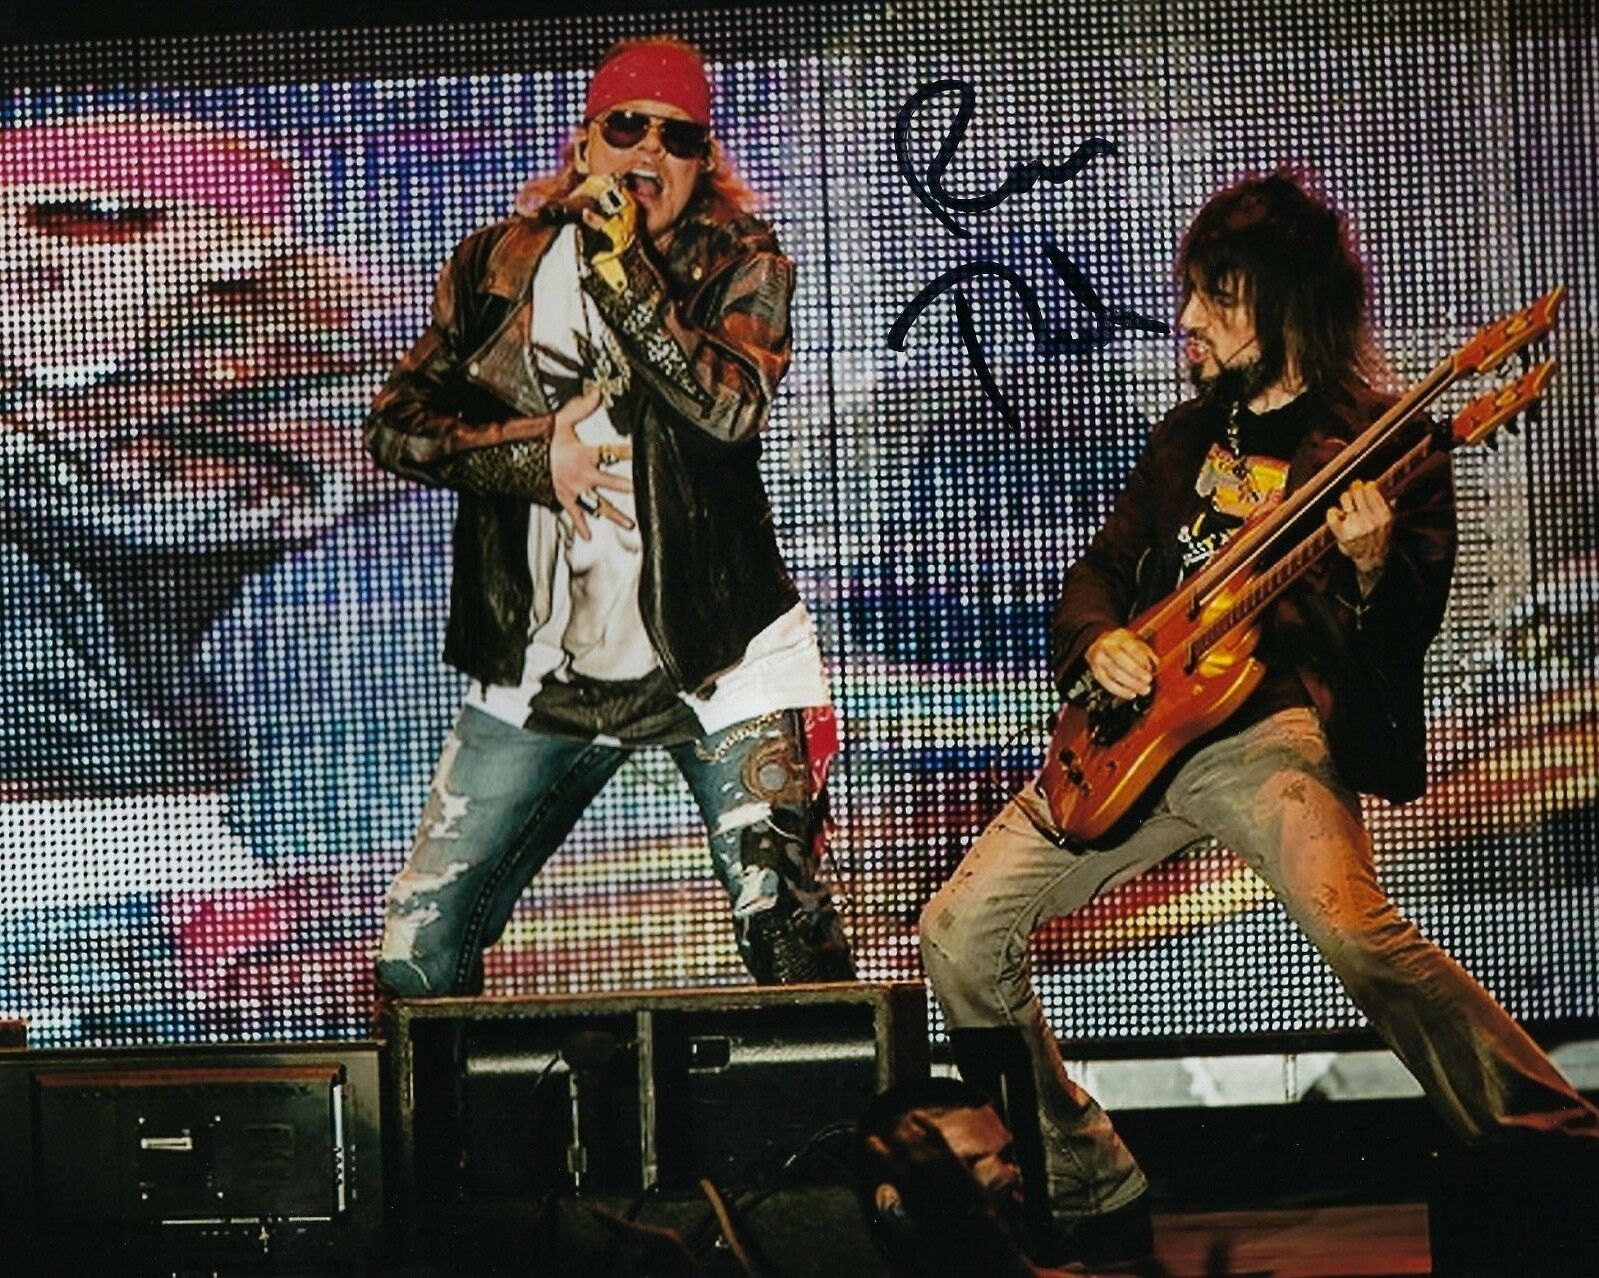 GFA Guns N' Roses * RON BUMBLEFOOT THAL * Signed 8x10 Photo Poster painting PROOF R2 COA